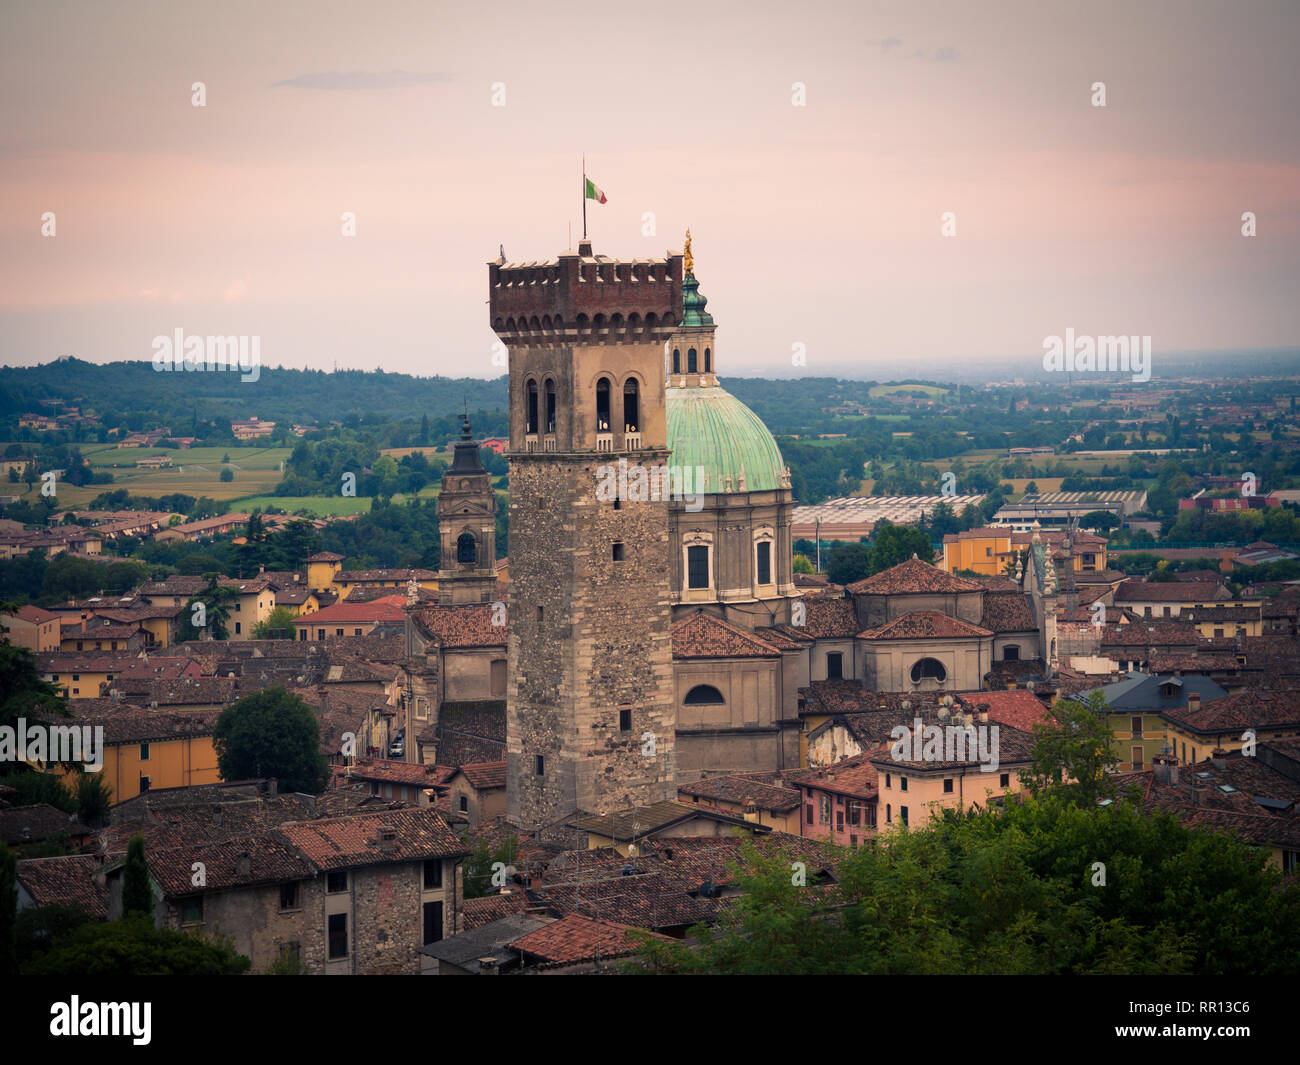 View of the medieval tower and the dome of the Cathedral in Lonato, Italy. Stock Photo